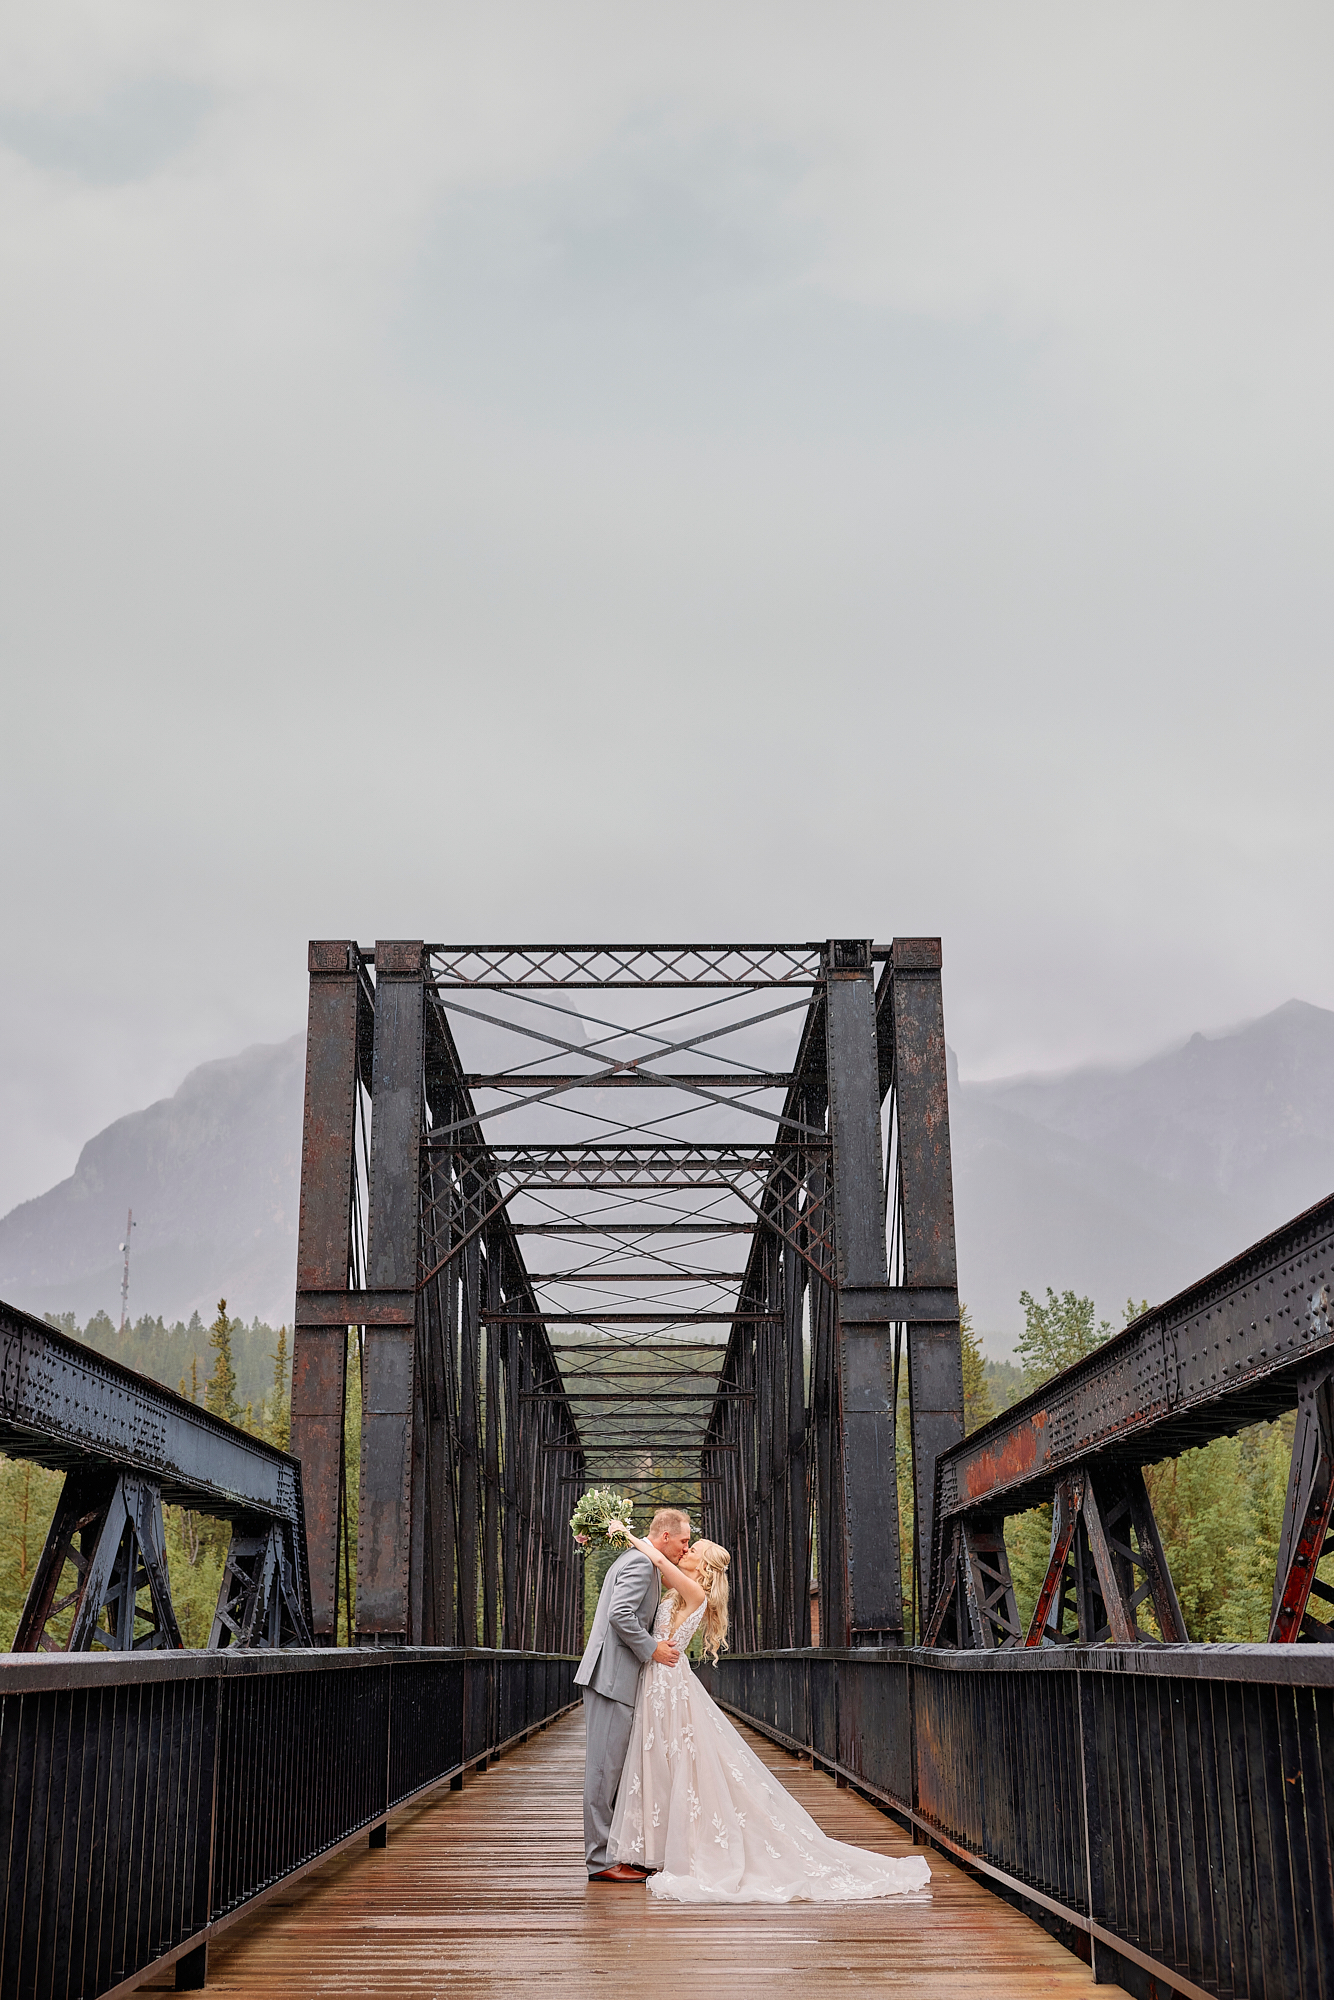 Wedding Portraits at Engine Bridge in Canmore